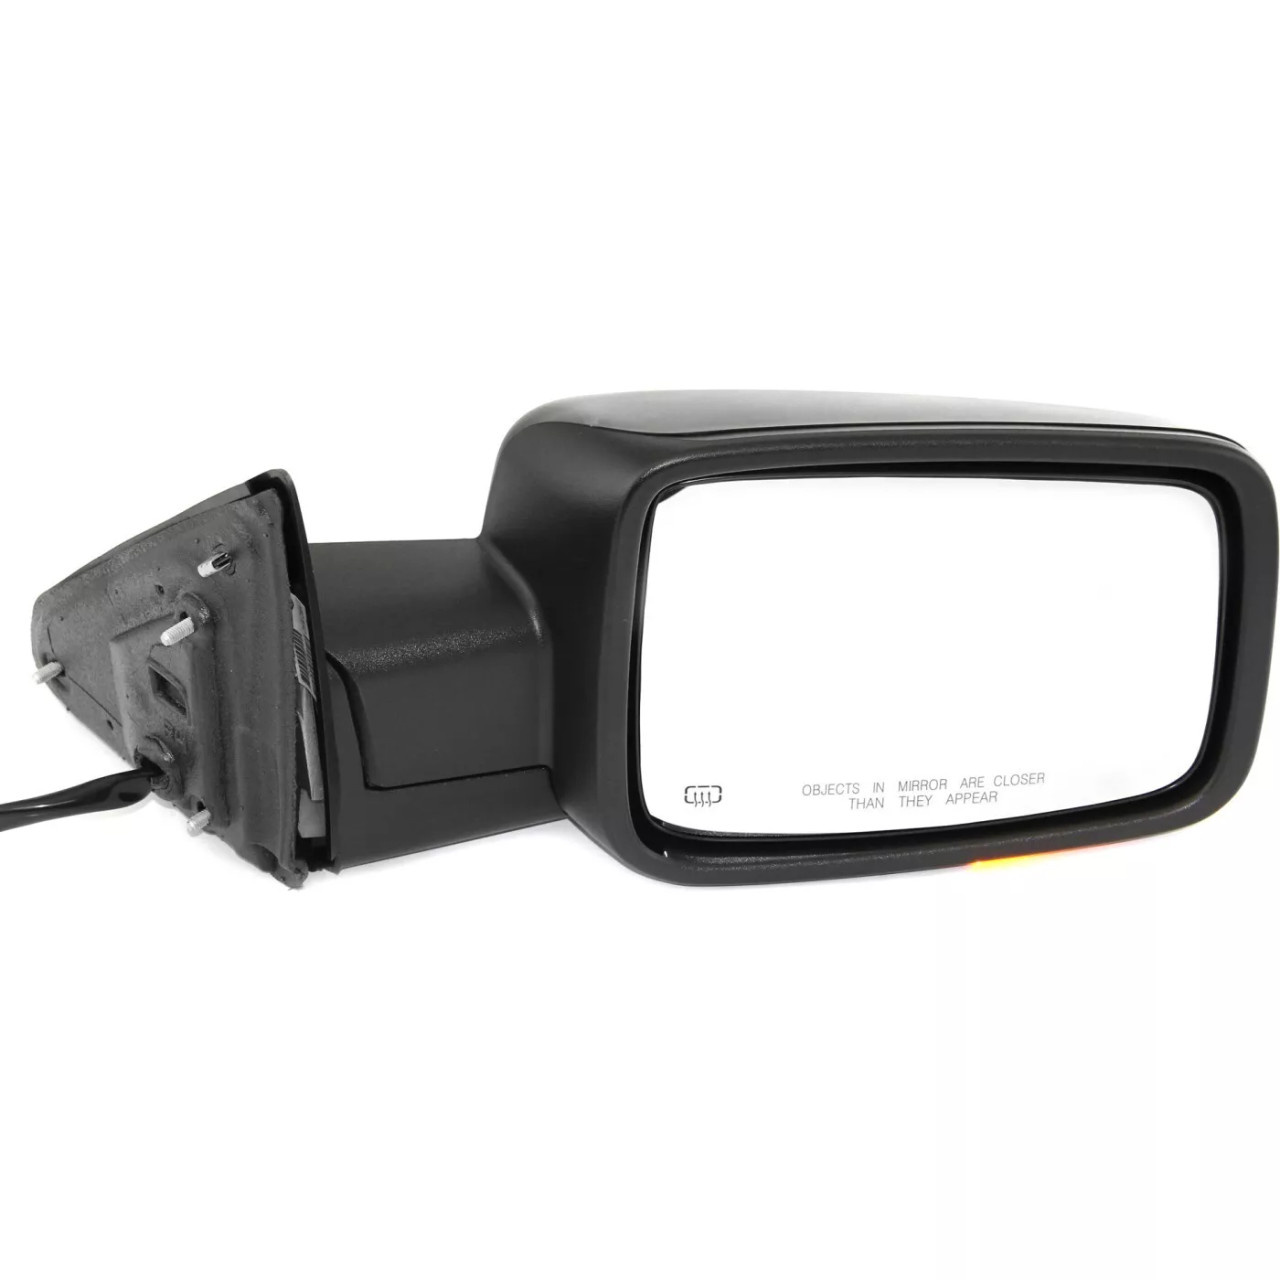 Mirror Set Of 2 For 2013-2018 Ram 1500 Manual Folding Textured Black Heated